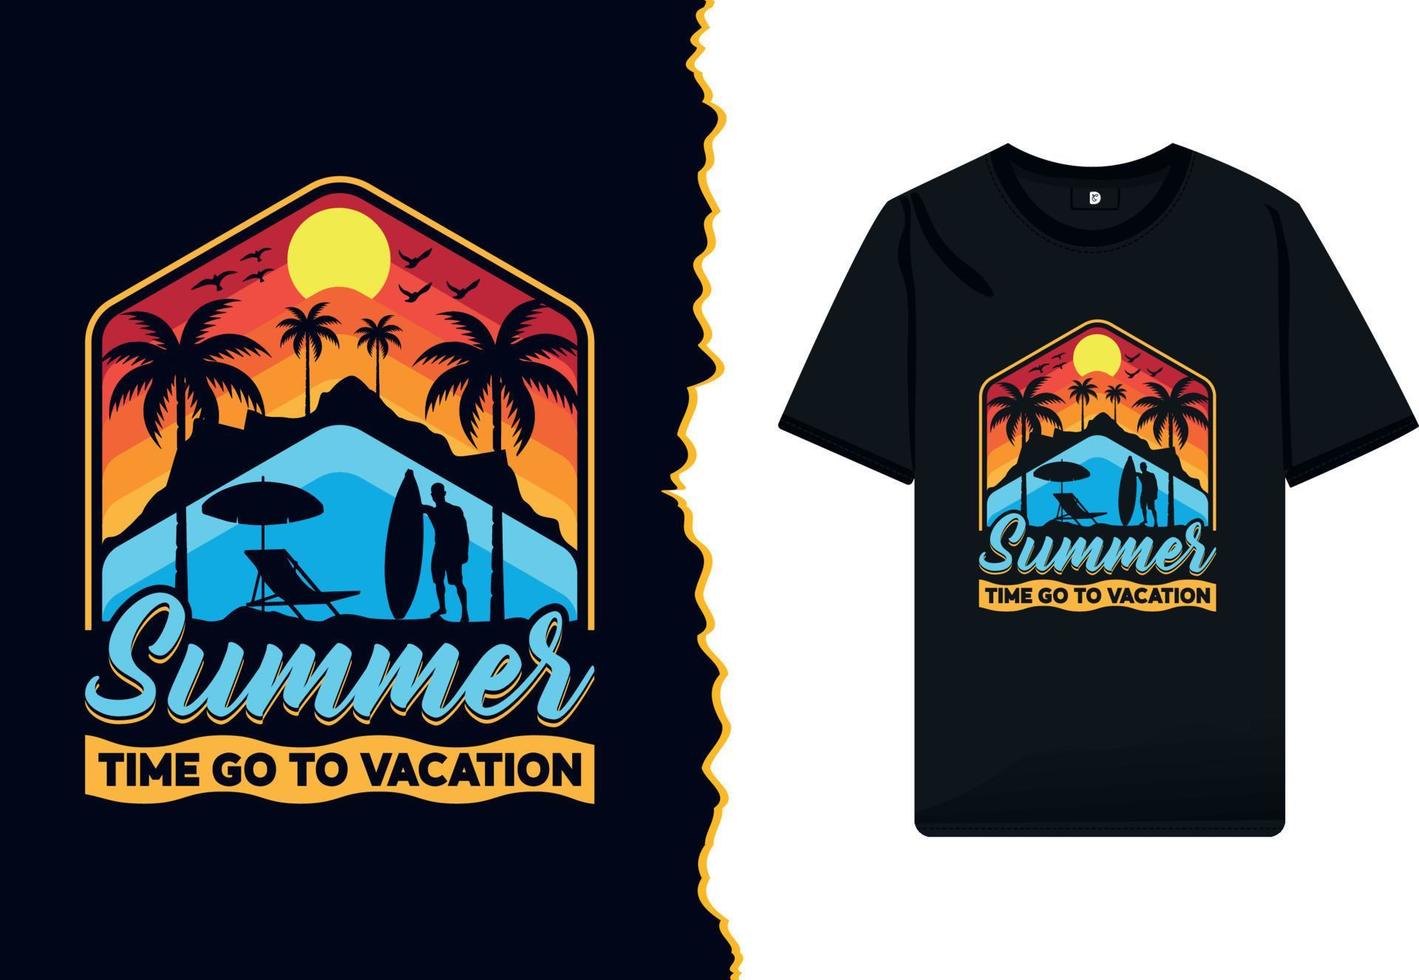 Summer vacation t-shirt design for a beach party. Typography vector illustration with palm trees and colorful retro summer print on the shirt template.